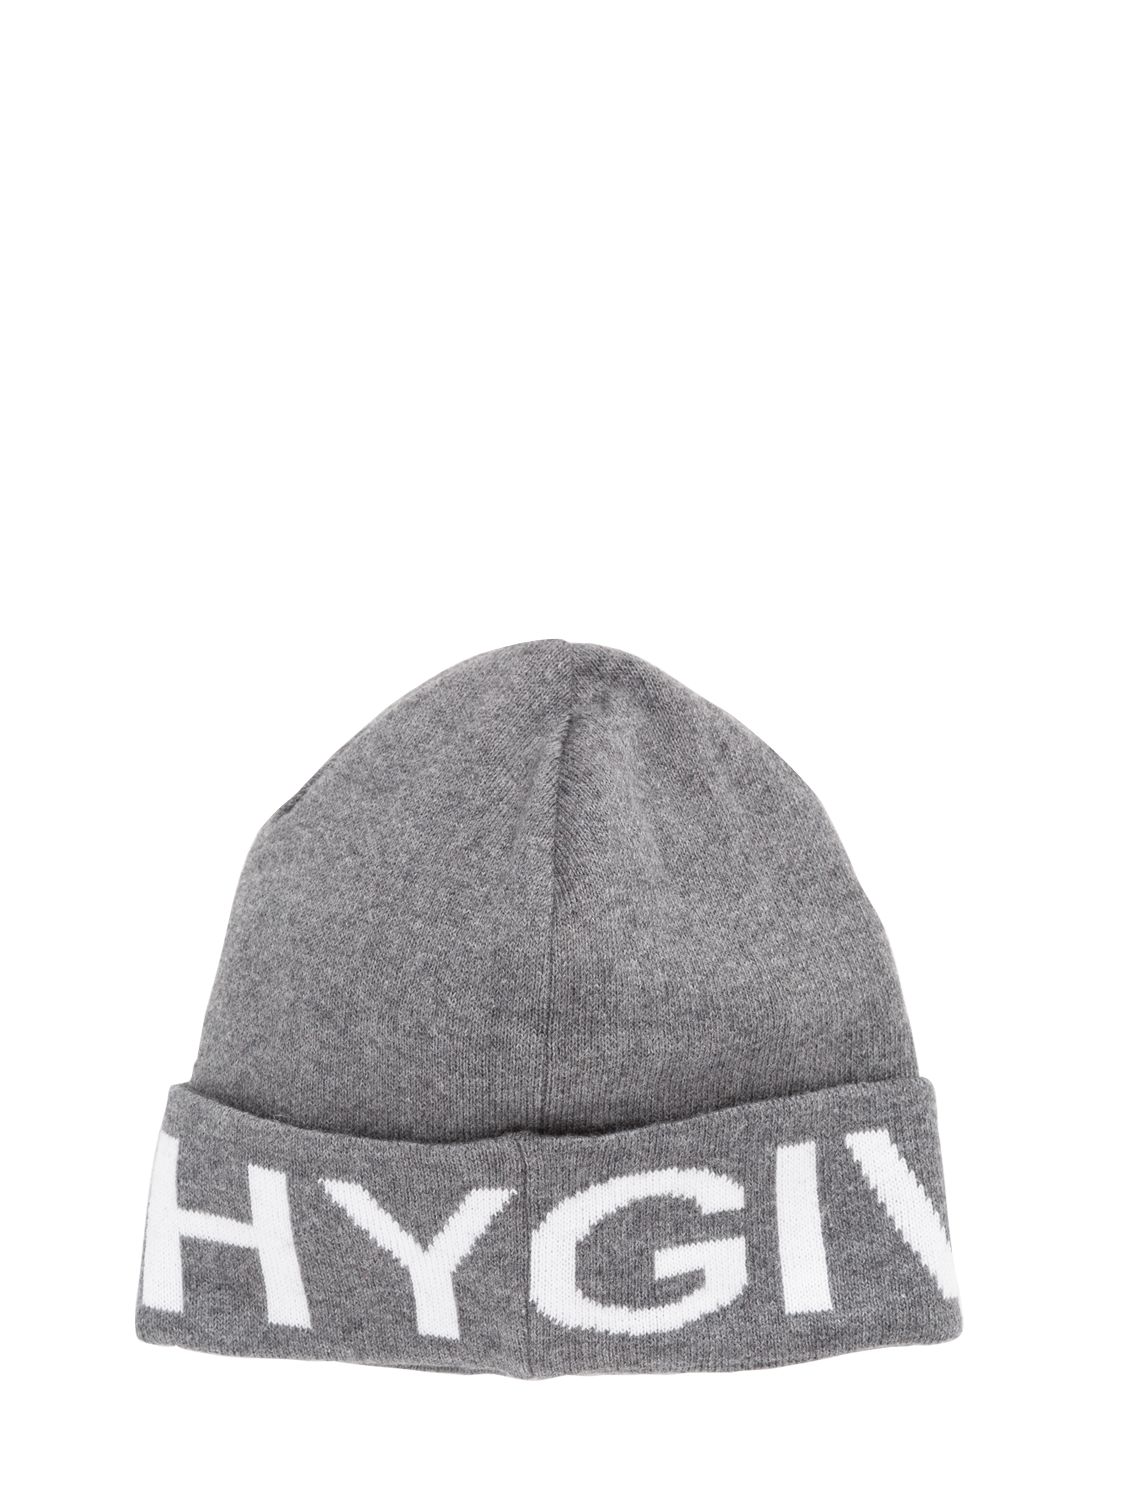 Givenchy Logo Intarsia Cotton Blend Beanie Hat In Gray